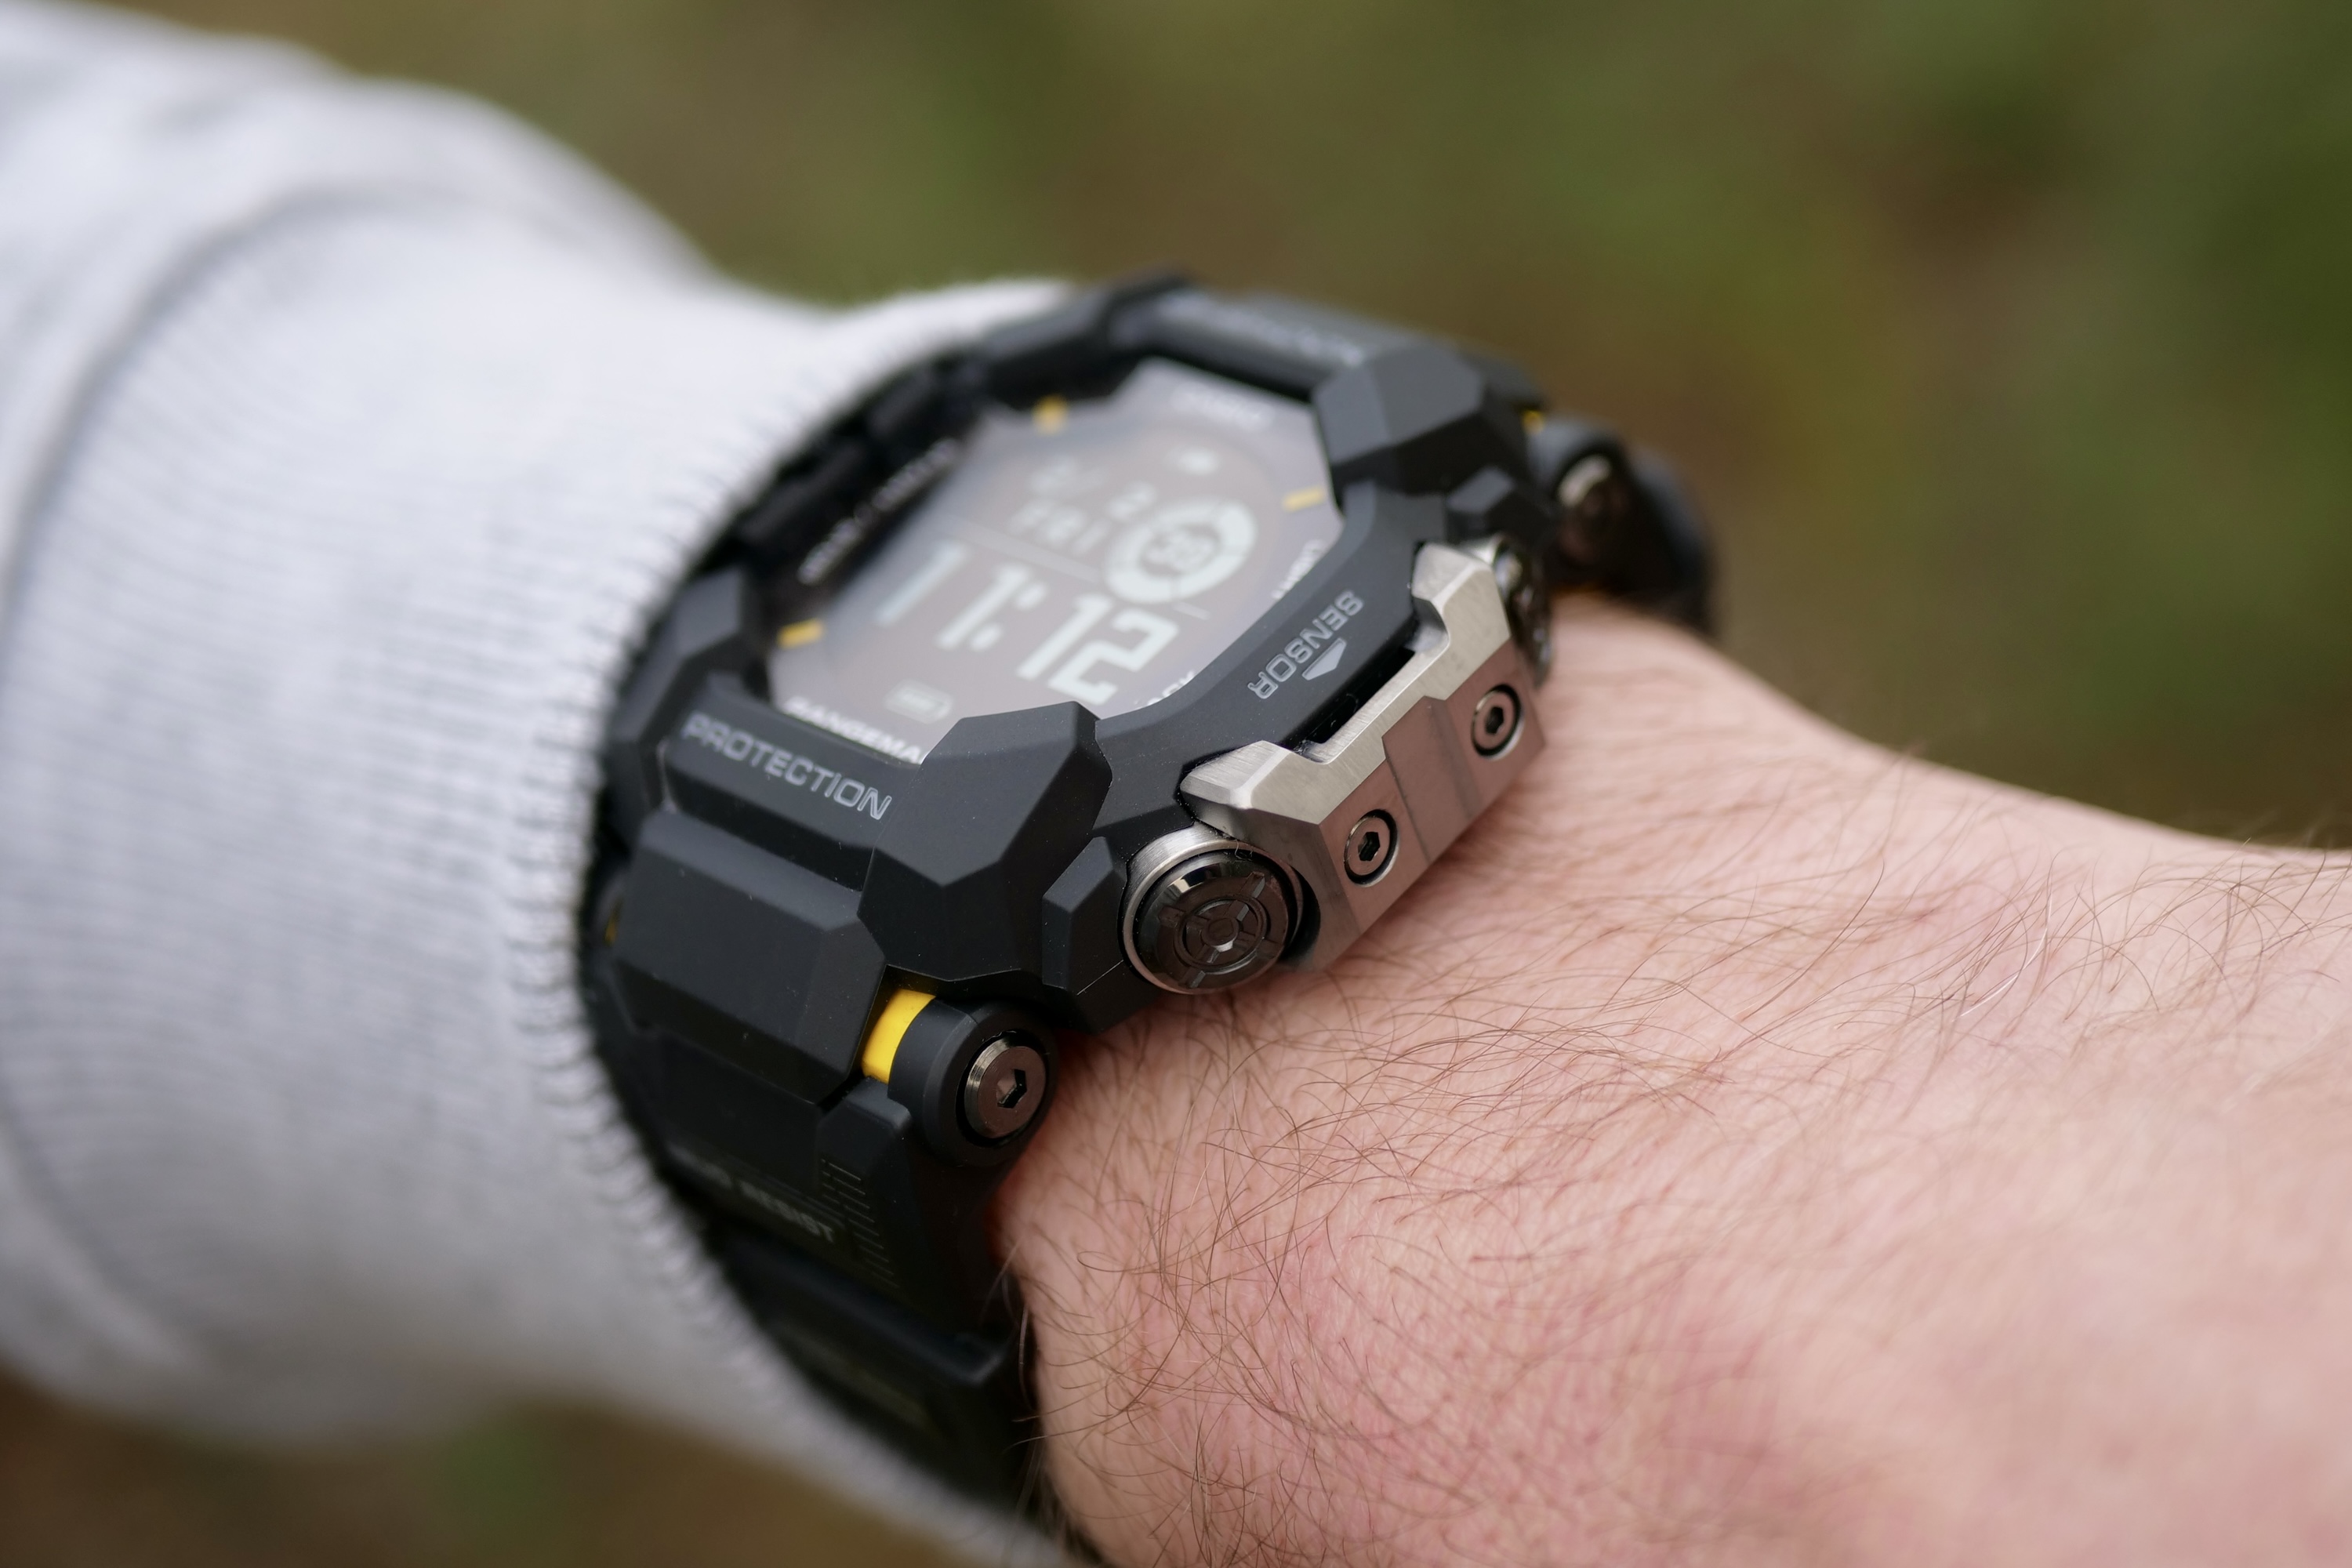 Casio G-Shock teams up with Polar for a revolutionary smartwatch